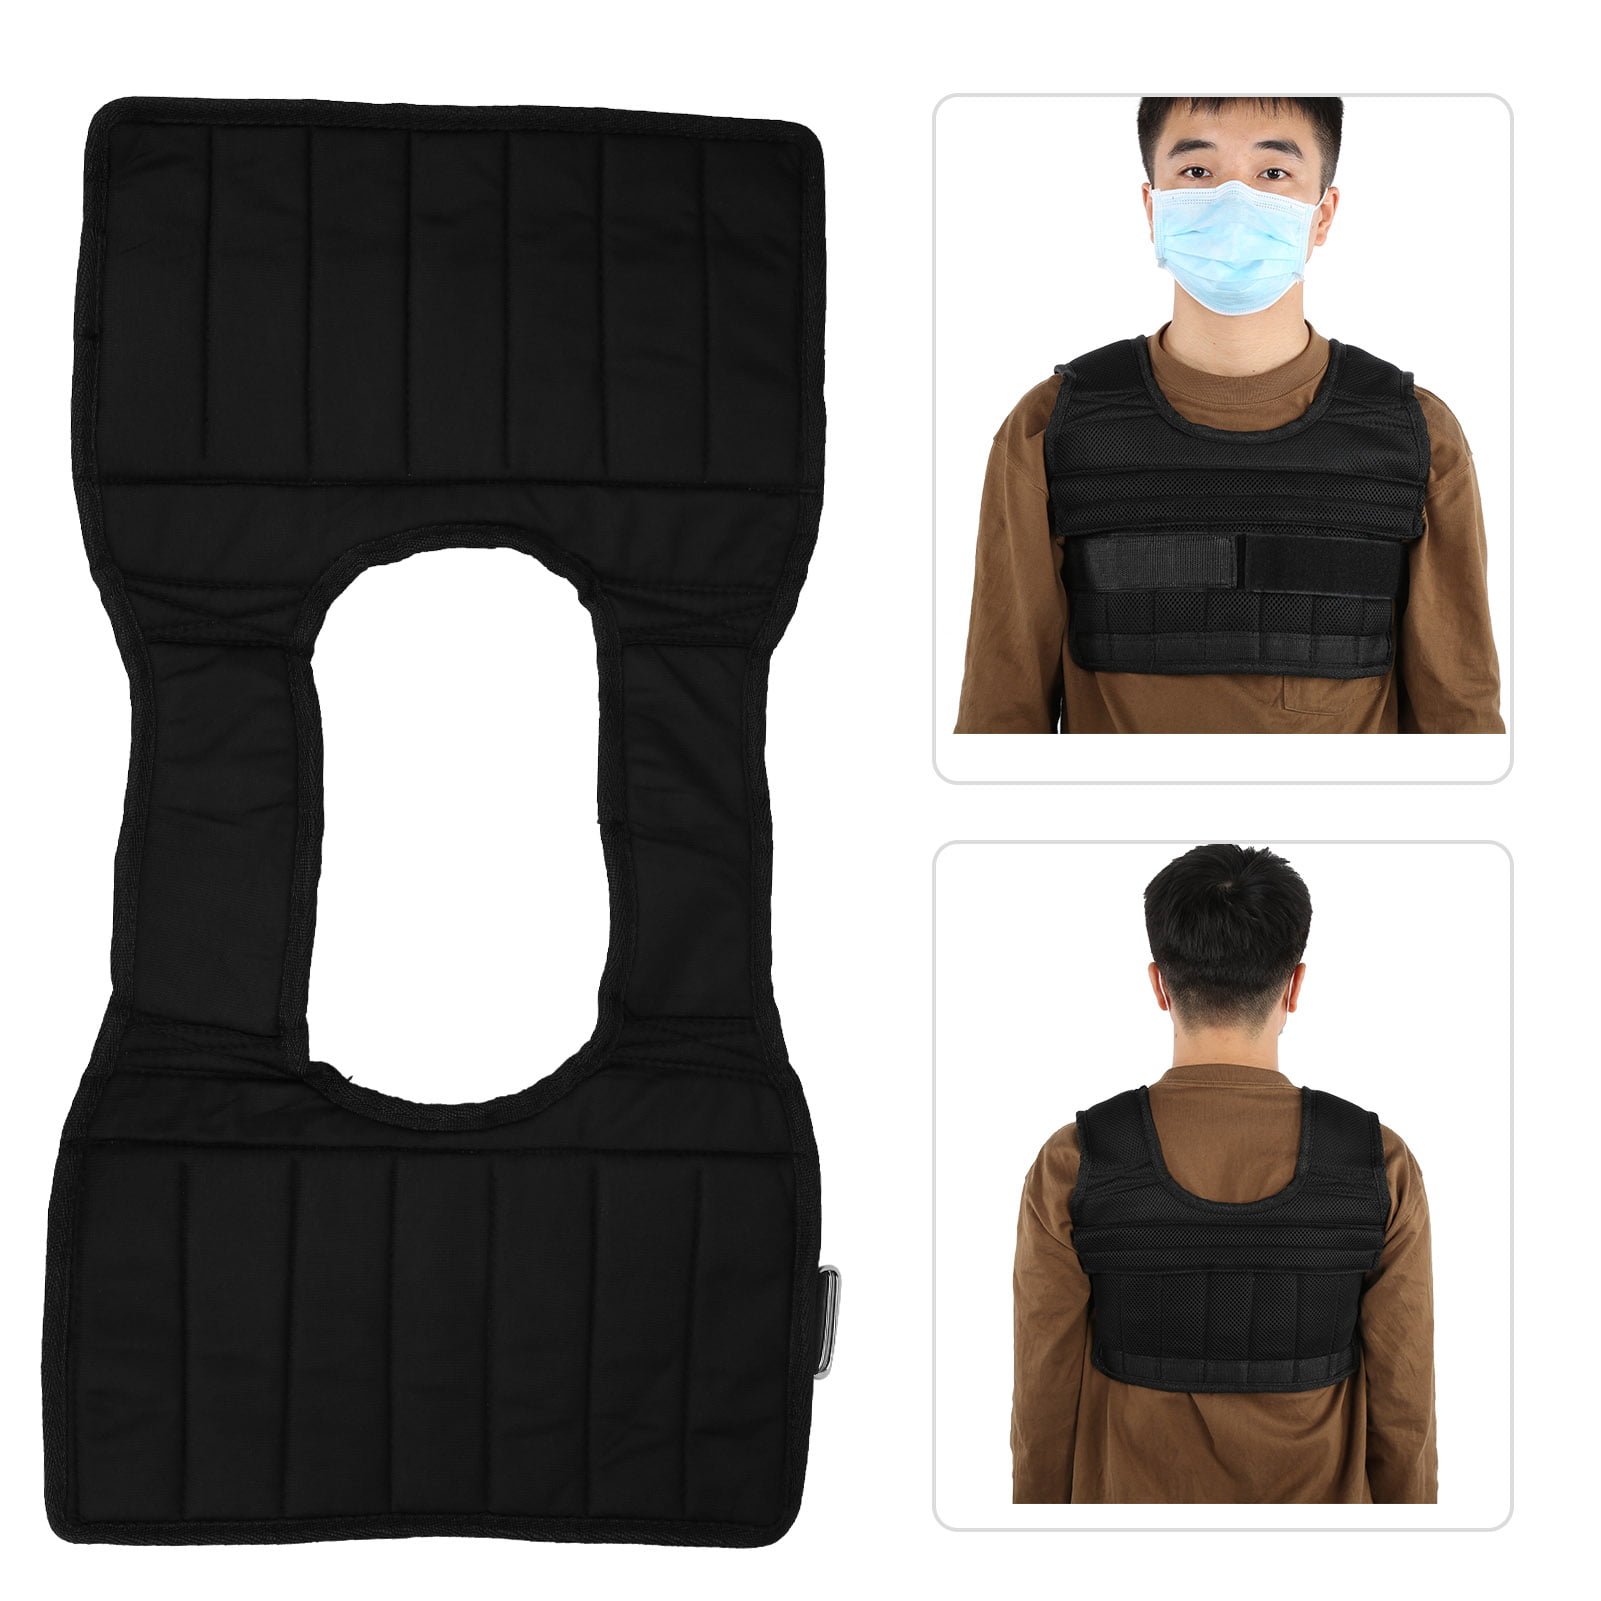 Details about   Weighted Vest 110.2lb Adjustable Weight Vest Breathable Sports Weight Training 